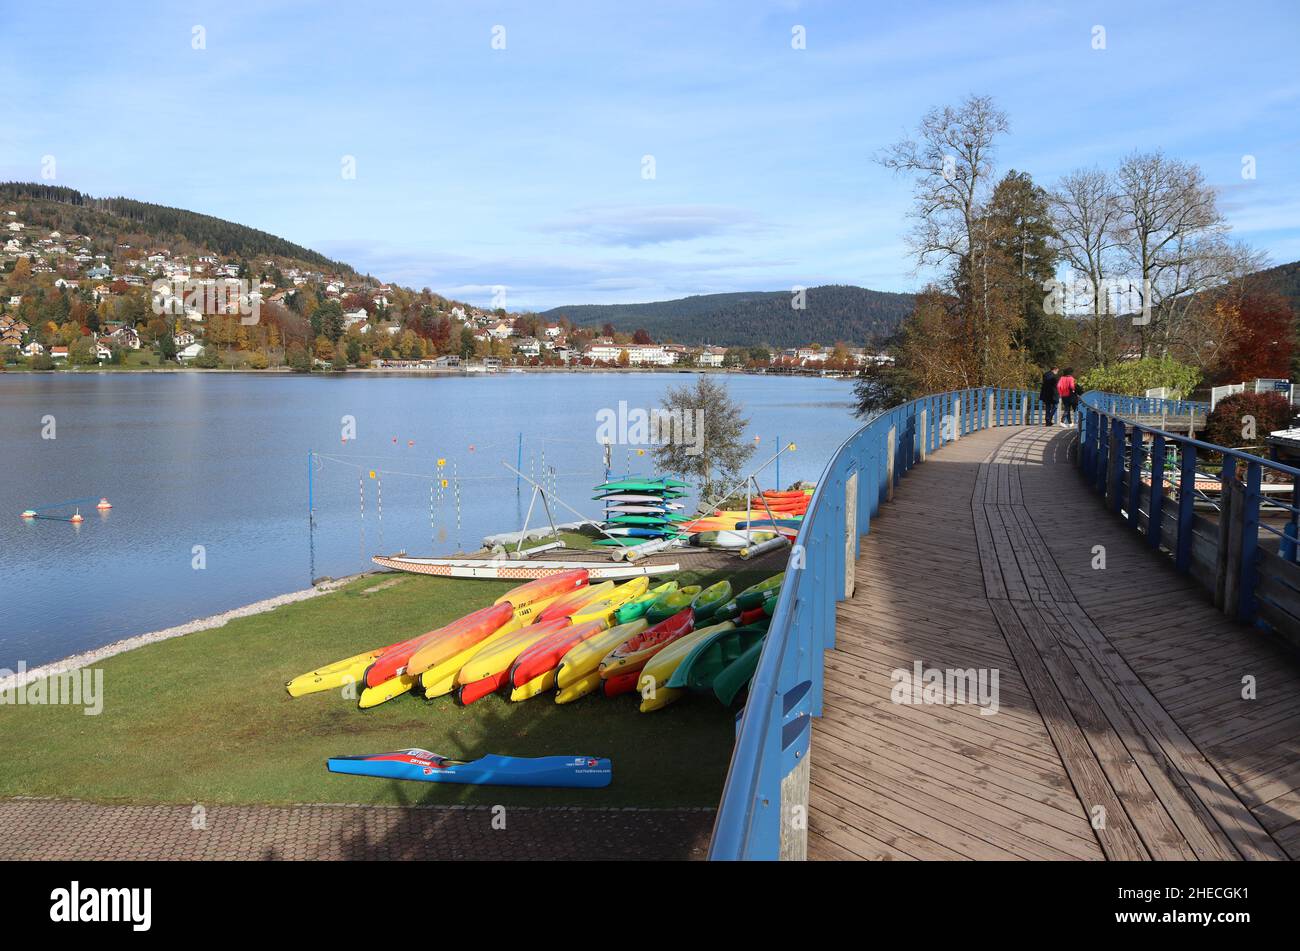 GERARDMER, FRANCE, 31 OCTOBER 2021: ASG Canoe and Kayak school and view across Gerardmer Lake in the Haut Vosges area of France. The school is a popul Stock Photo